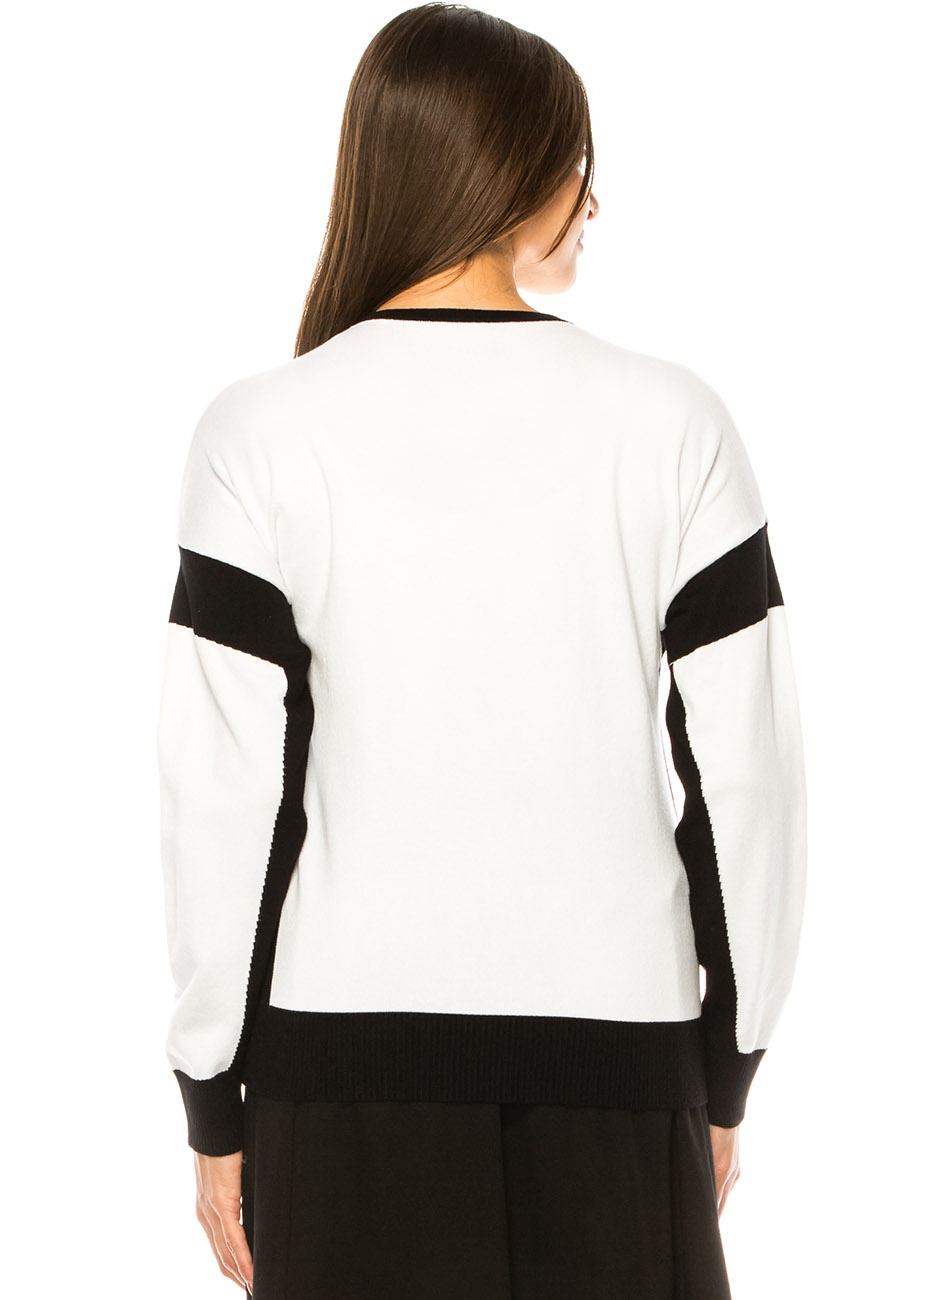 Classic Contrast Sweater – White with Black